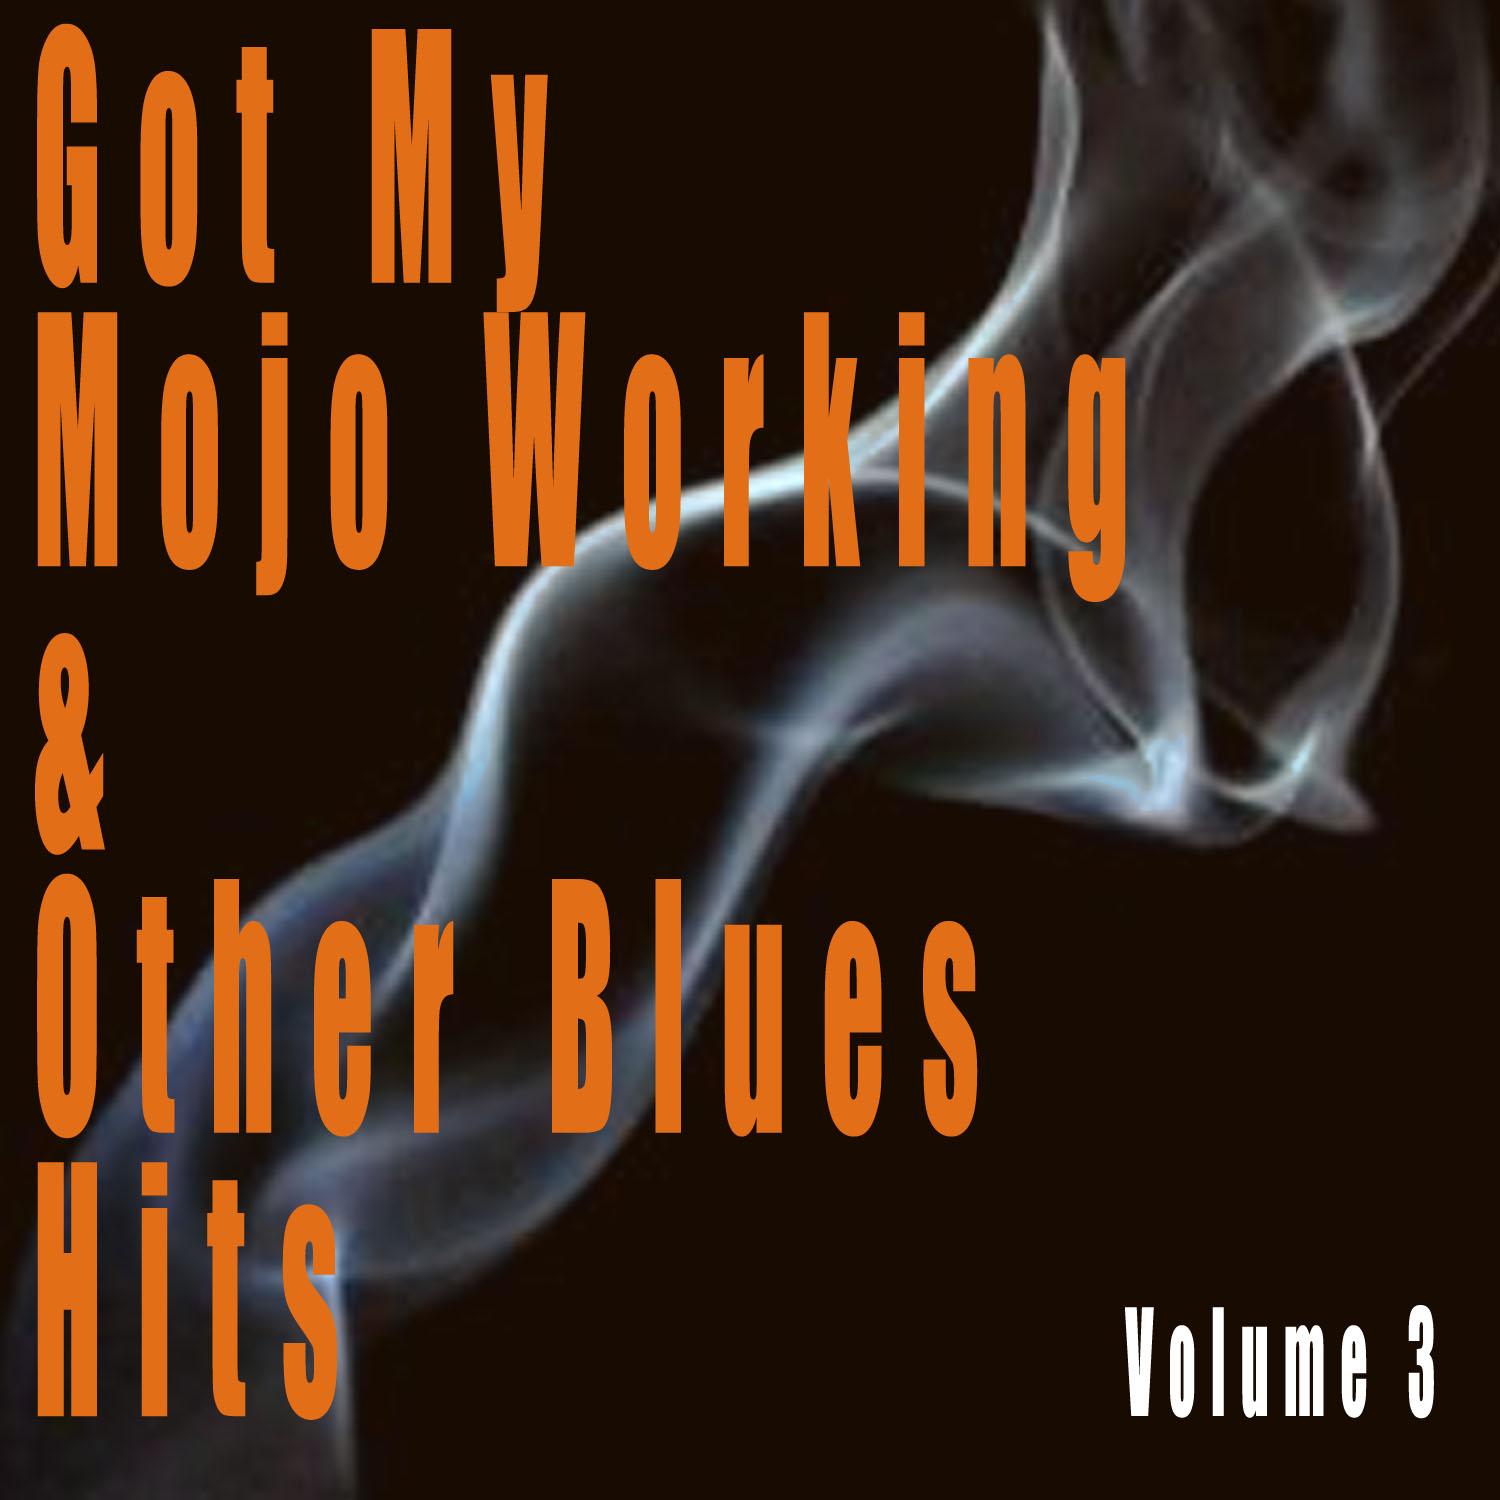 Got My Mojo Working & Other Blues Hits, Vol. 3